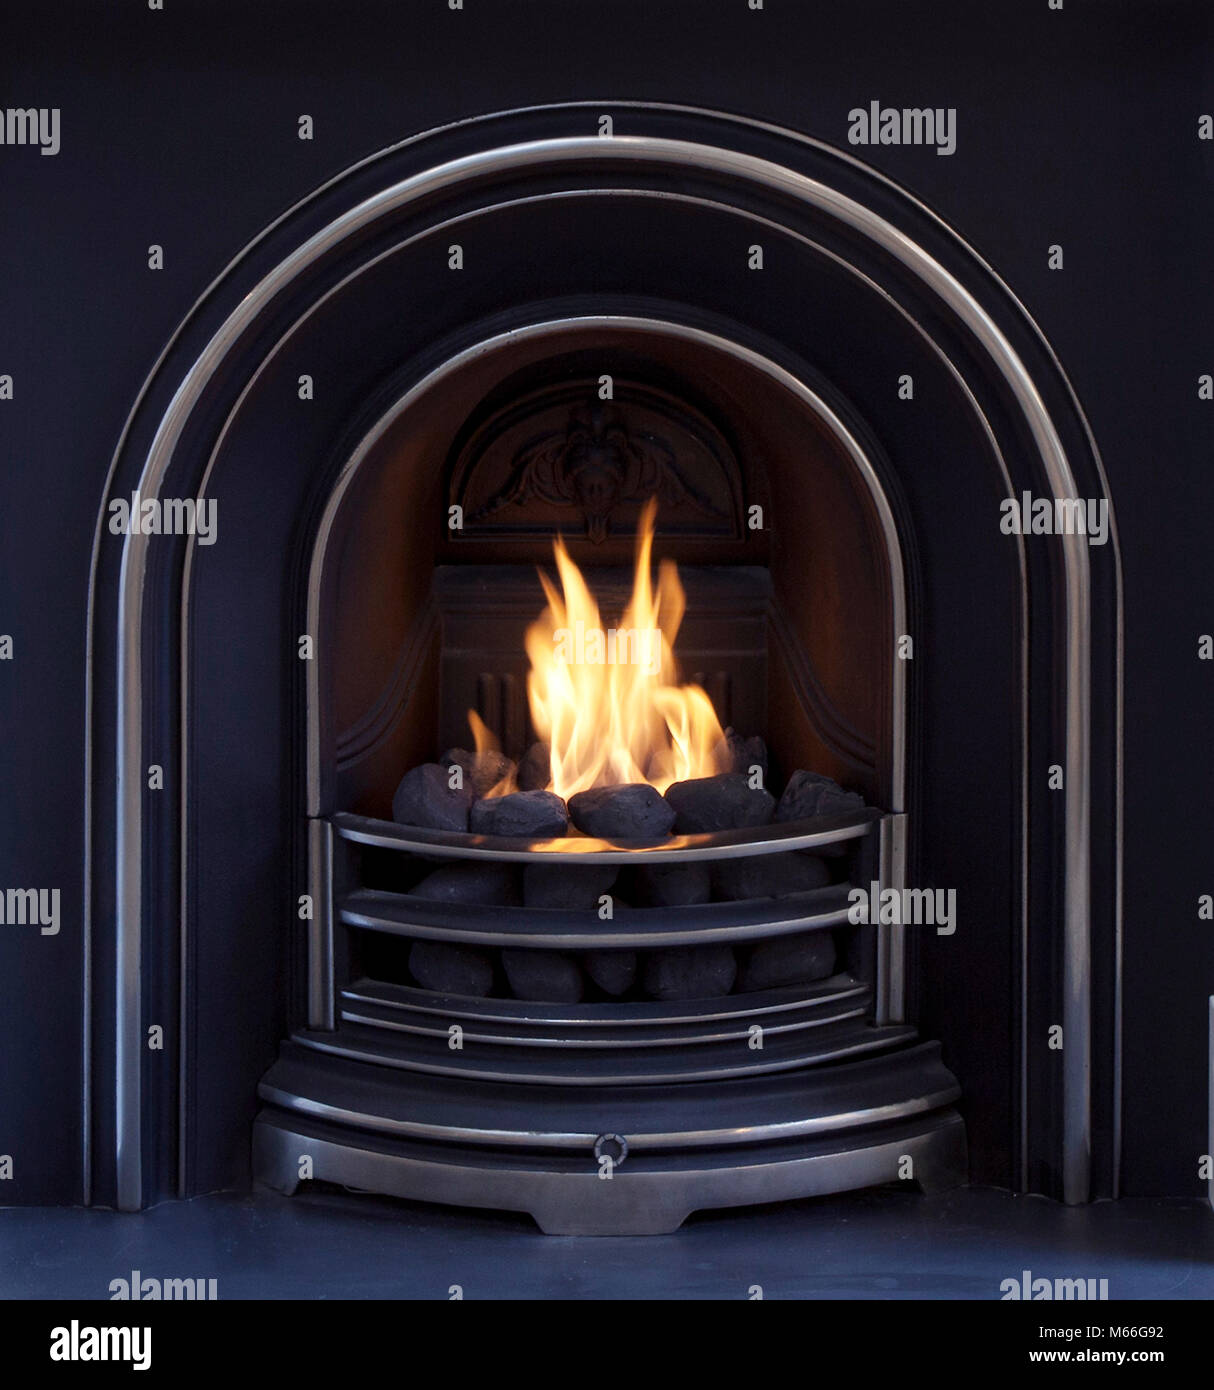 open coal effect gas fire with metal fire place with flames Stock Photo